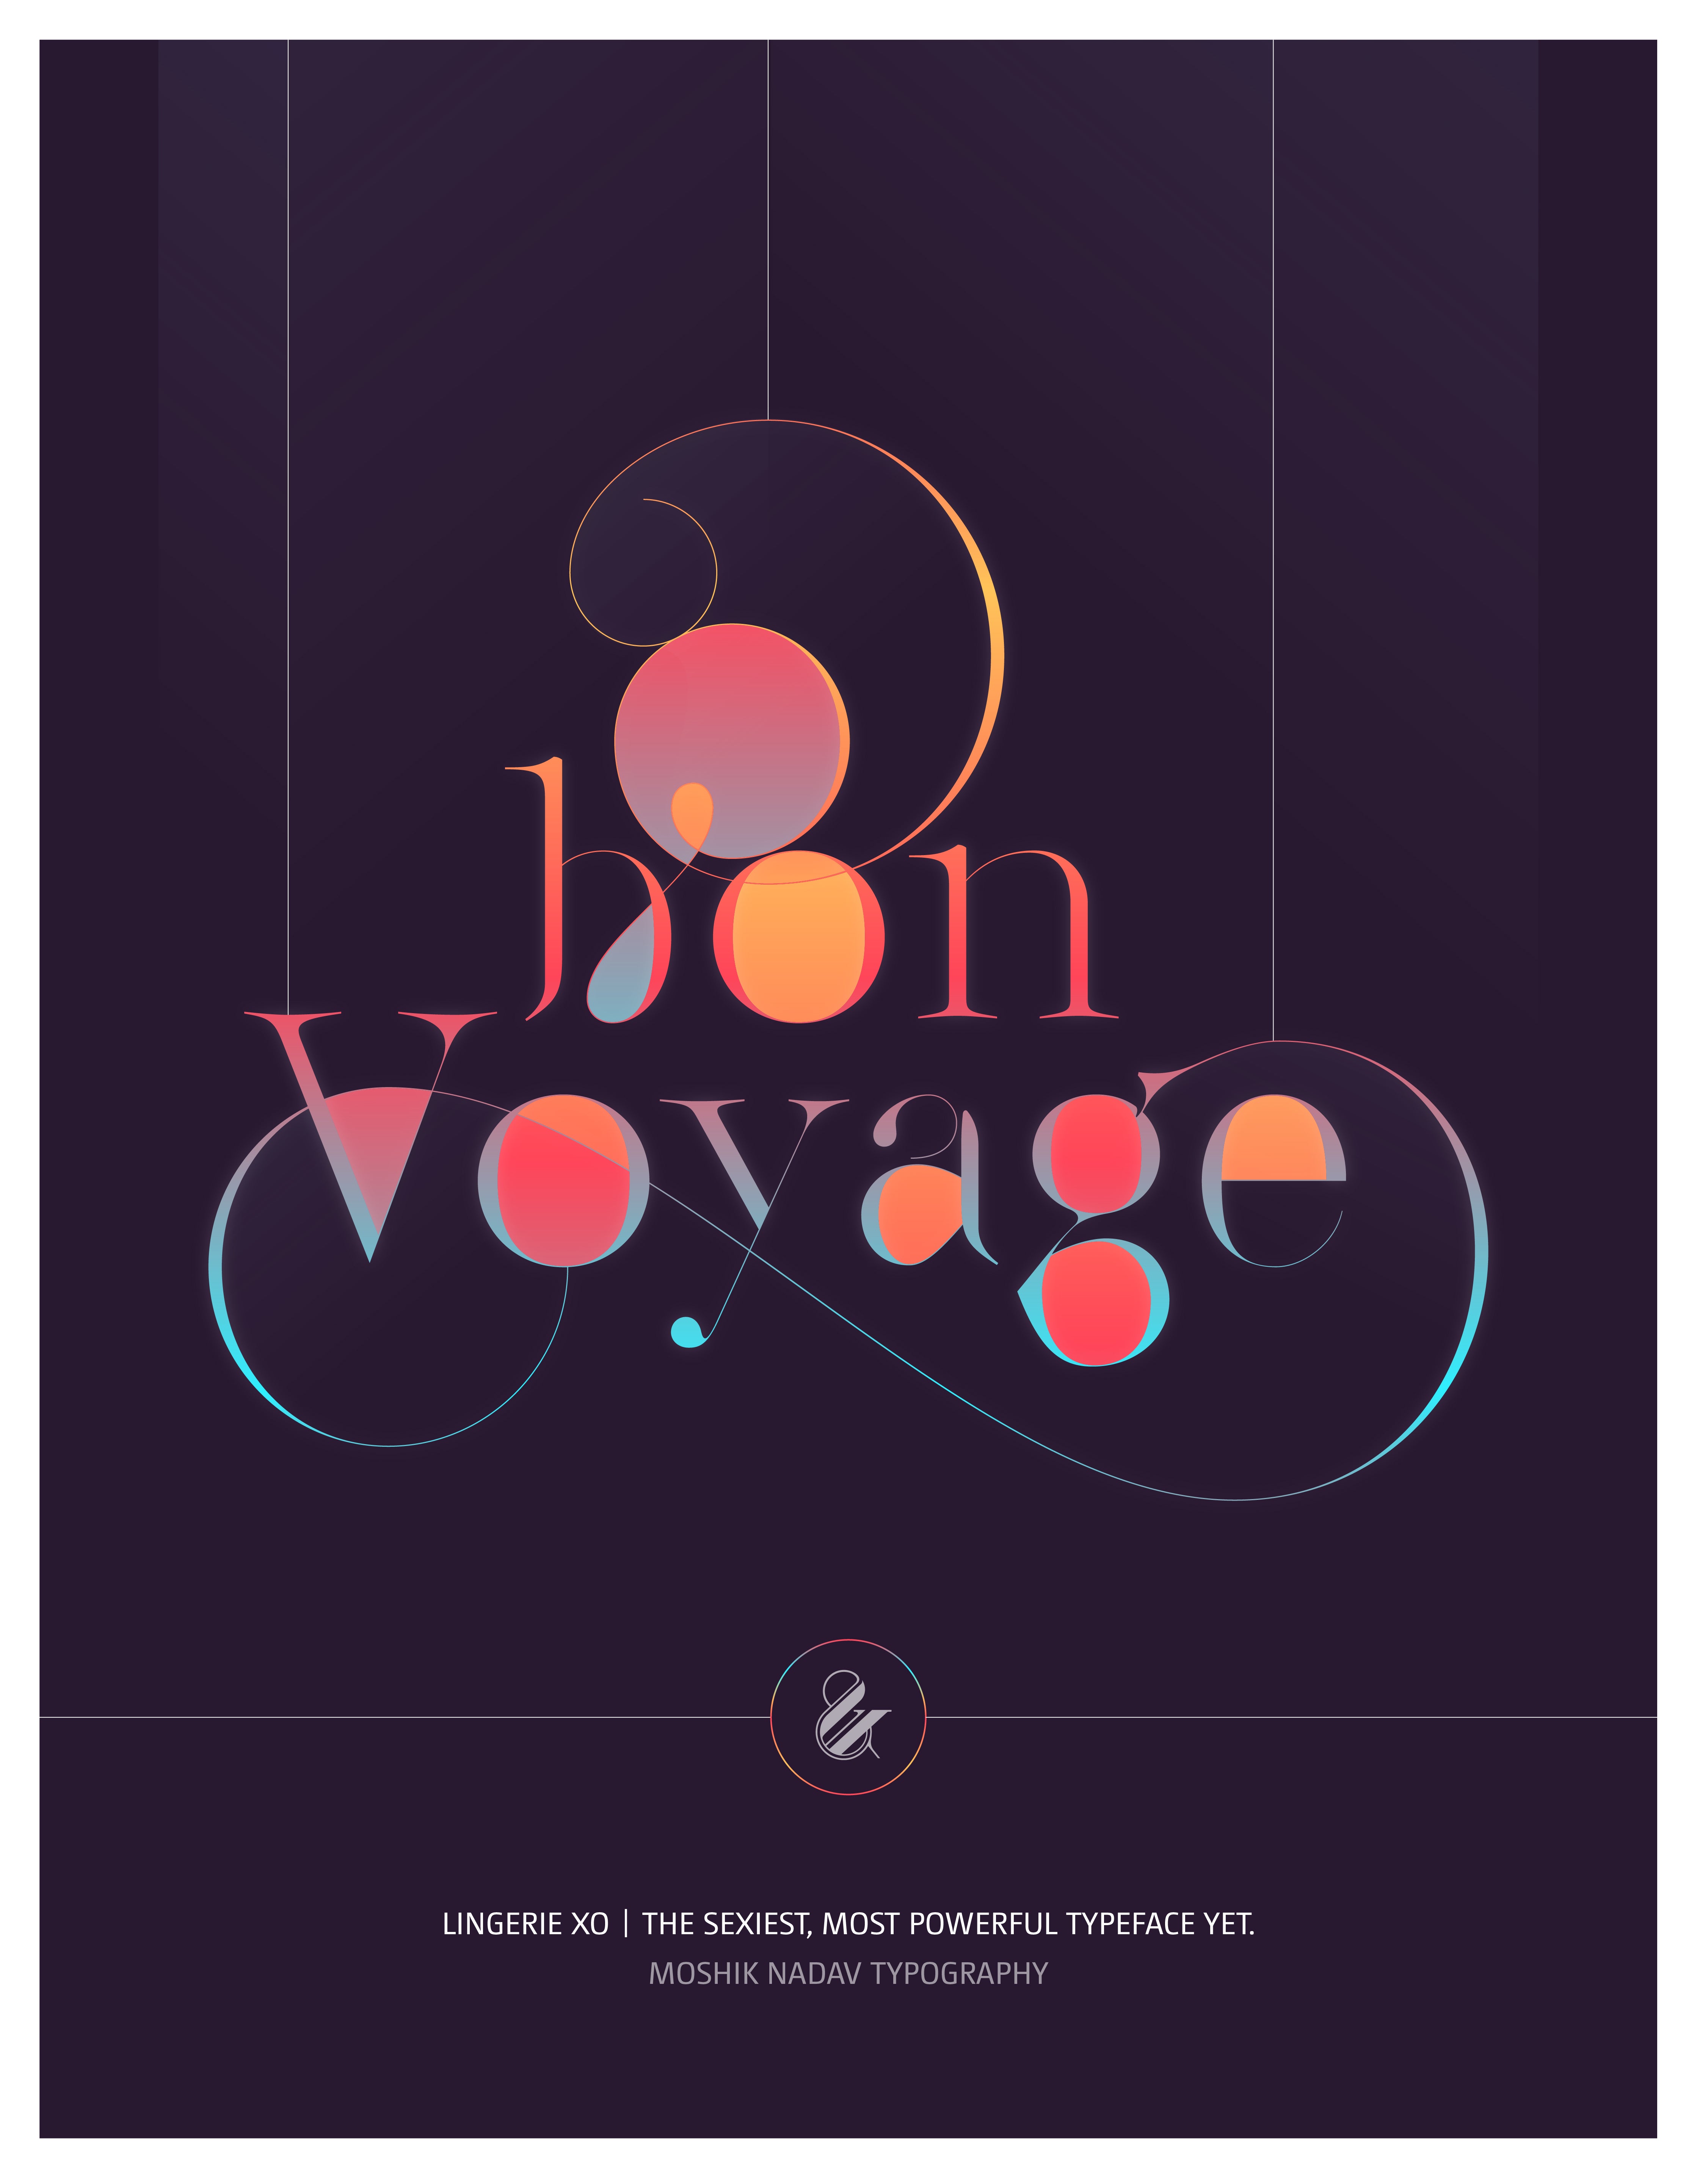 Bon Voyage fancy poster - designed with the sexy font Lingerie XO by Moshik Nadav Fashion Typography NYC